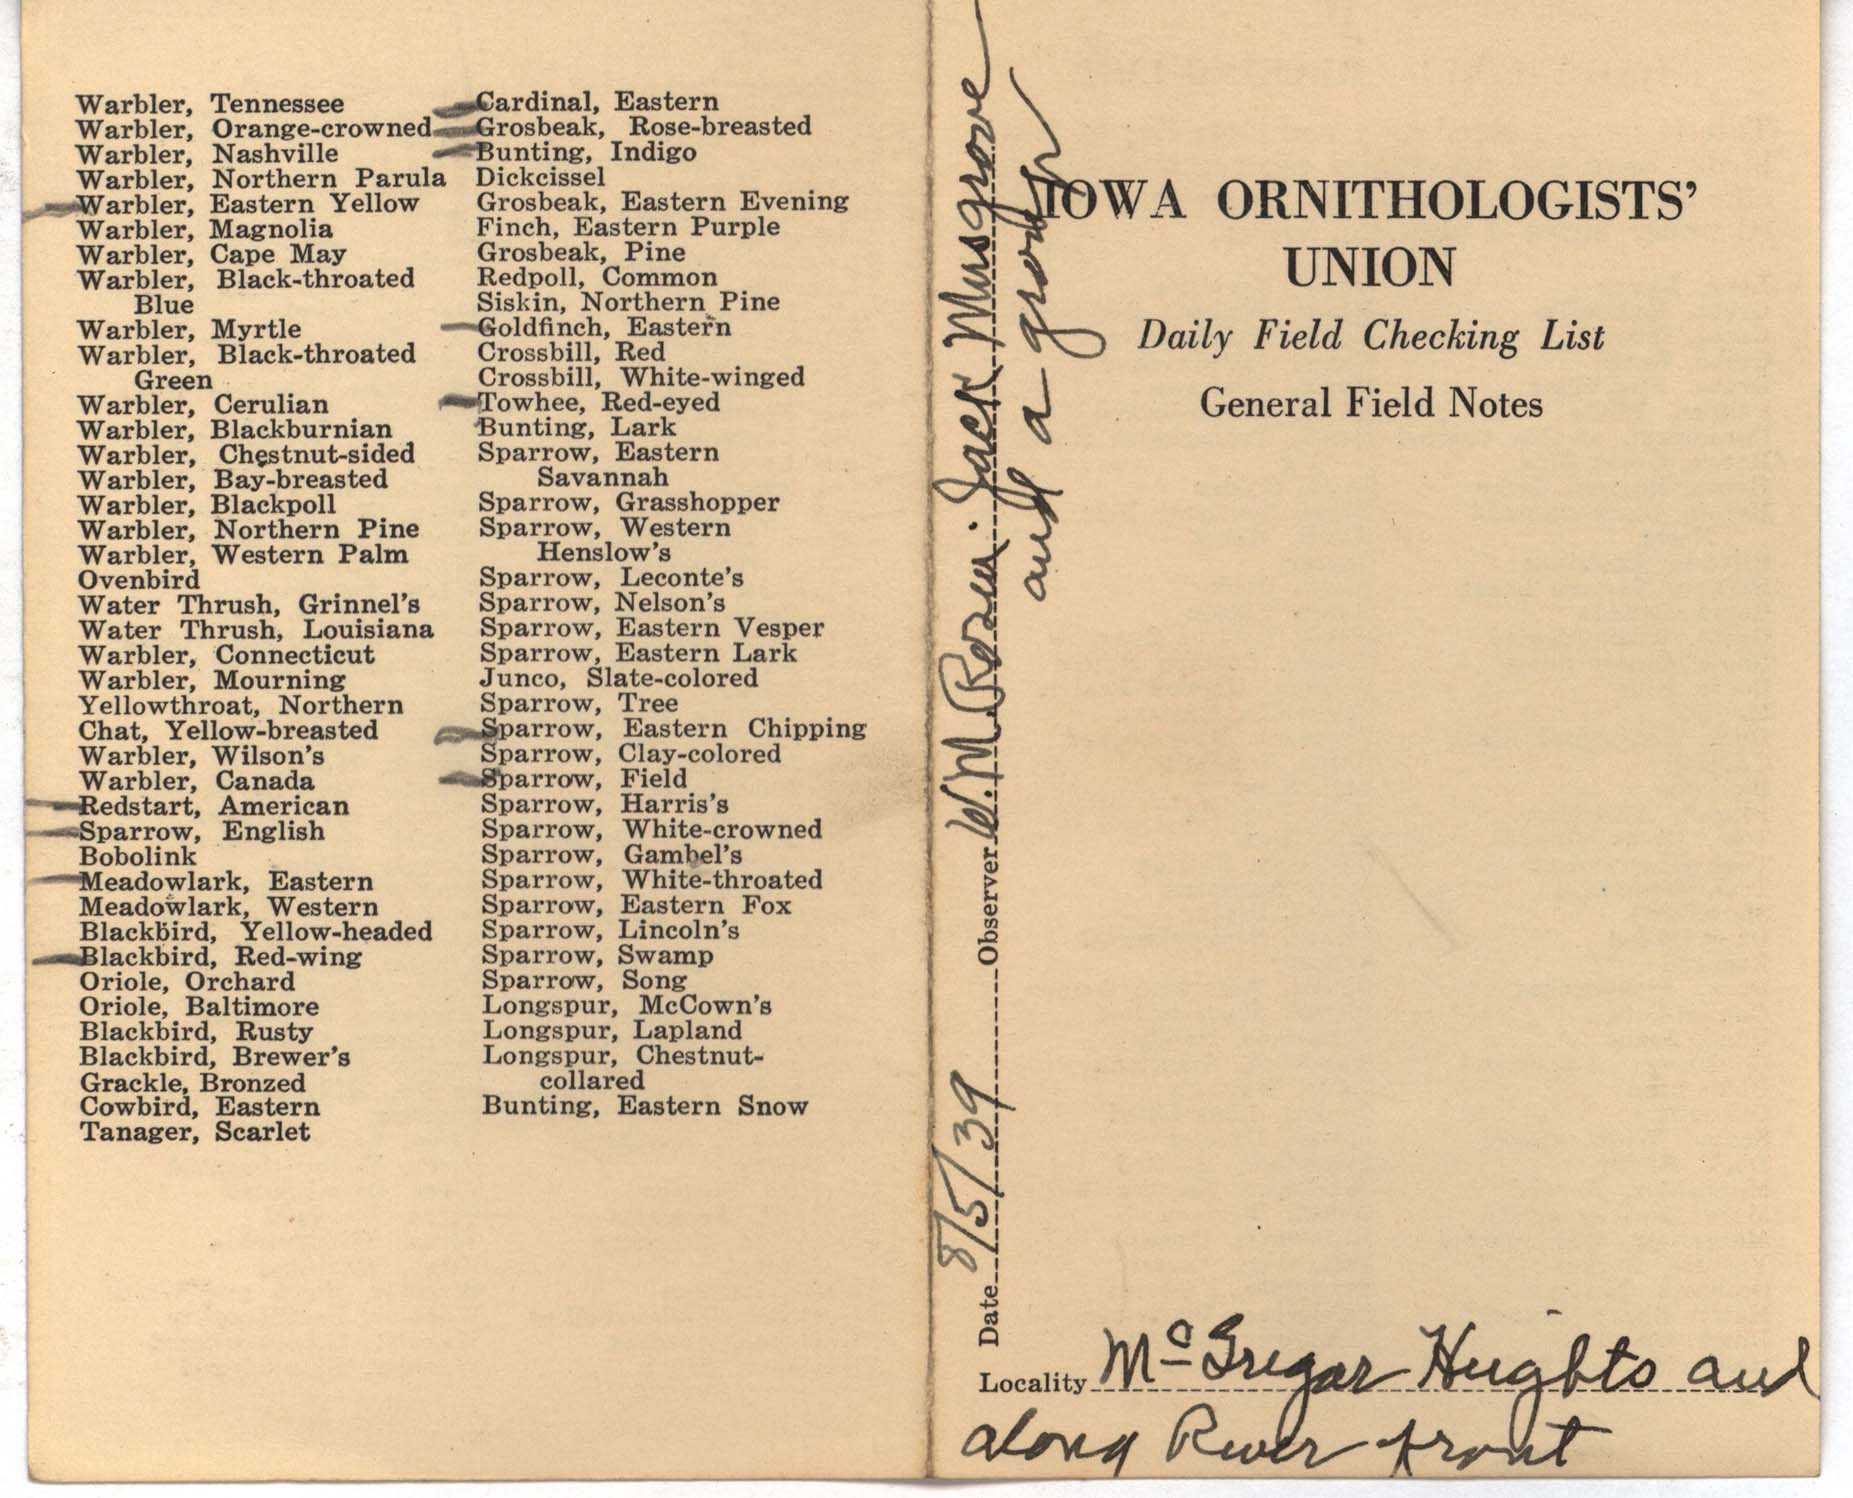 Daily field checking list by Walter Rosene, August 5, 1939